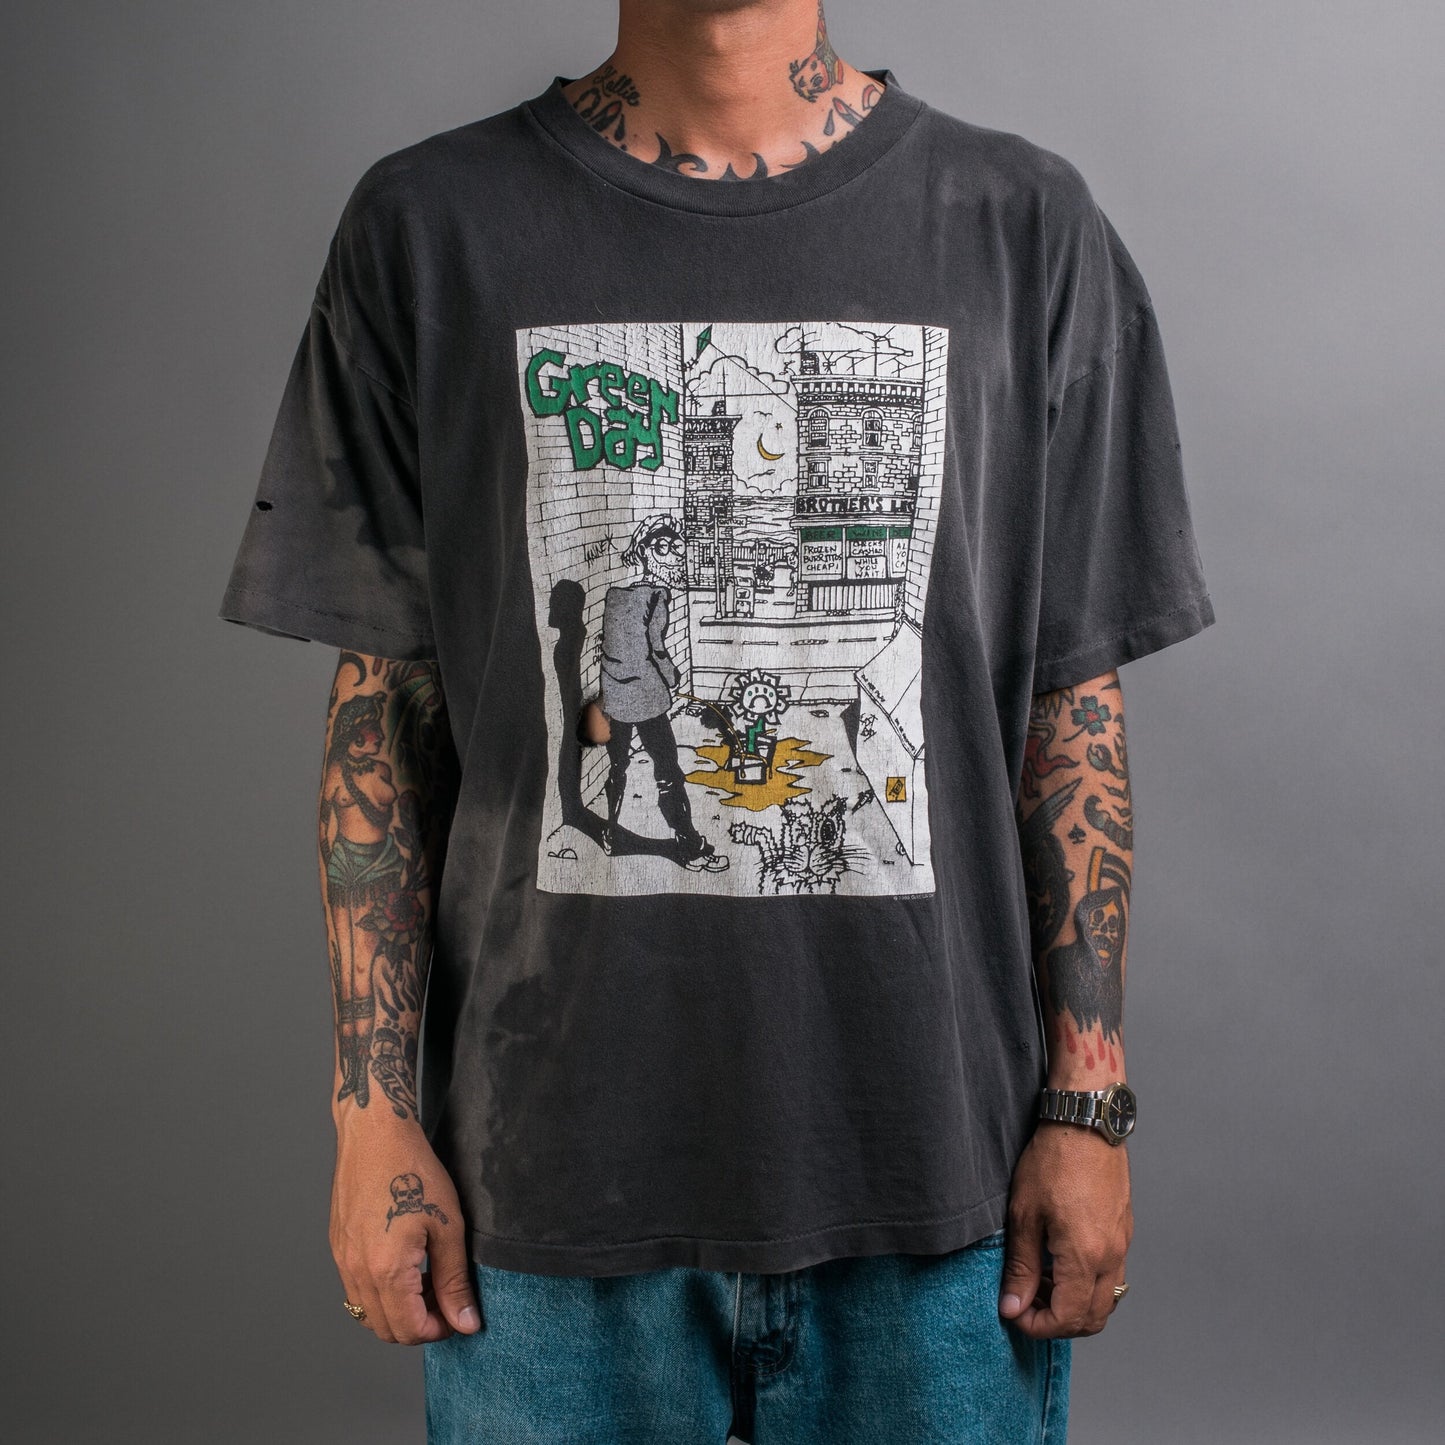 Vintage 1994 Green Day Dookie Tour T-Shirt